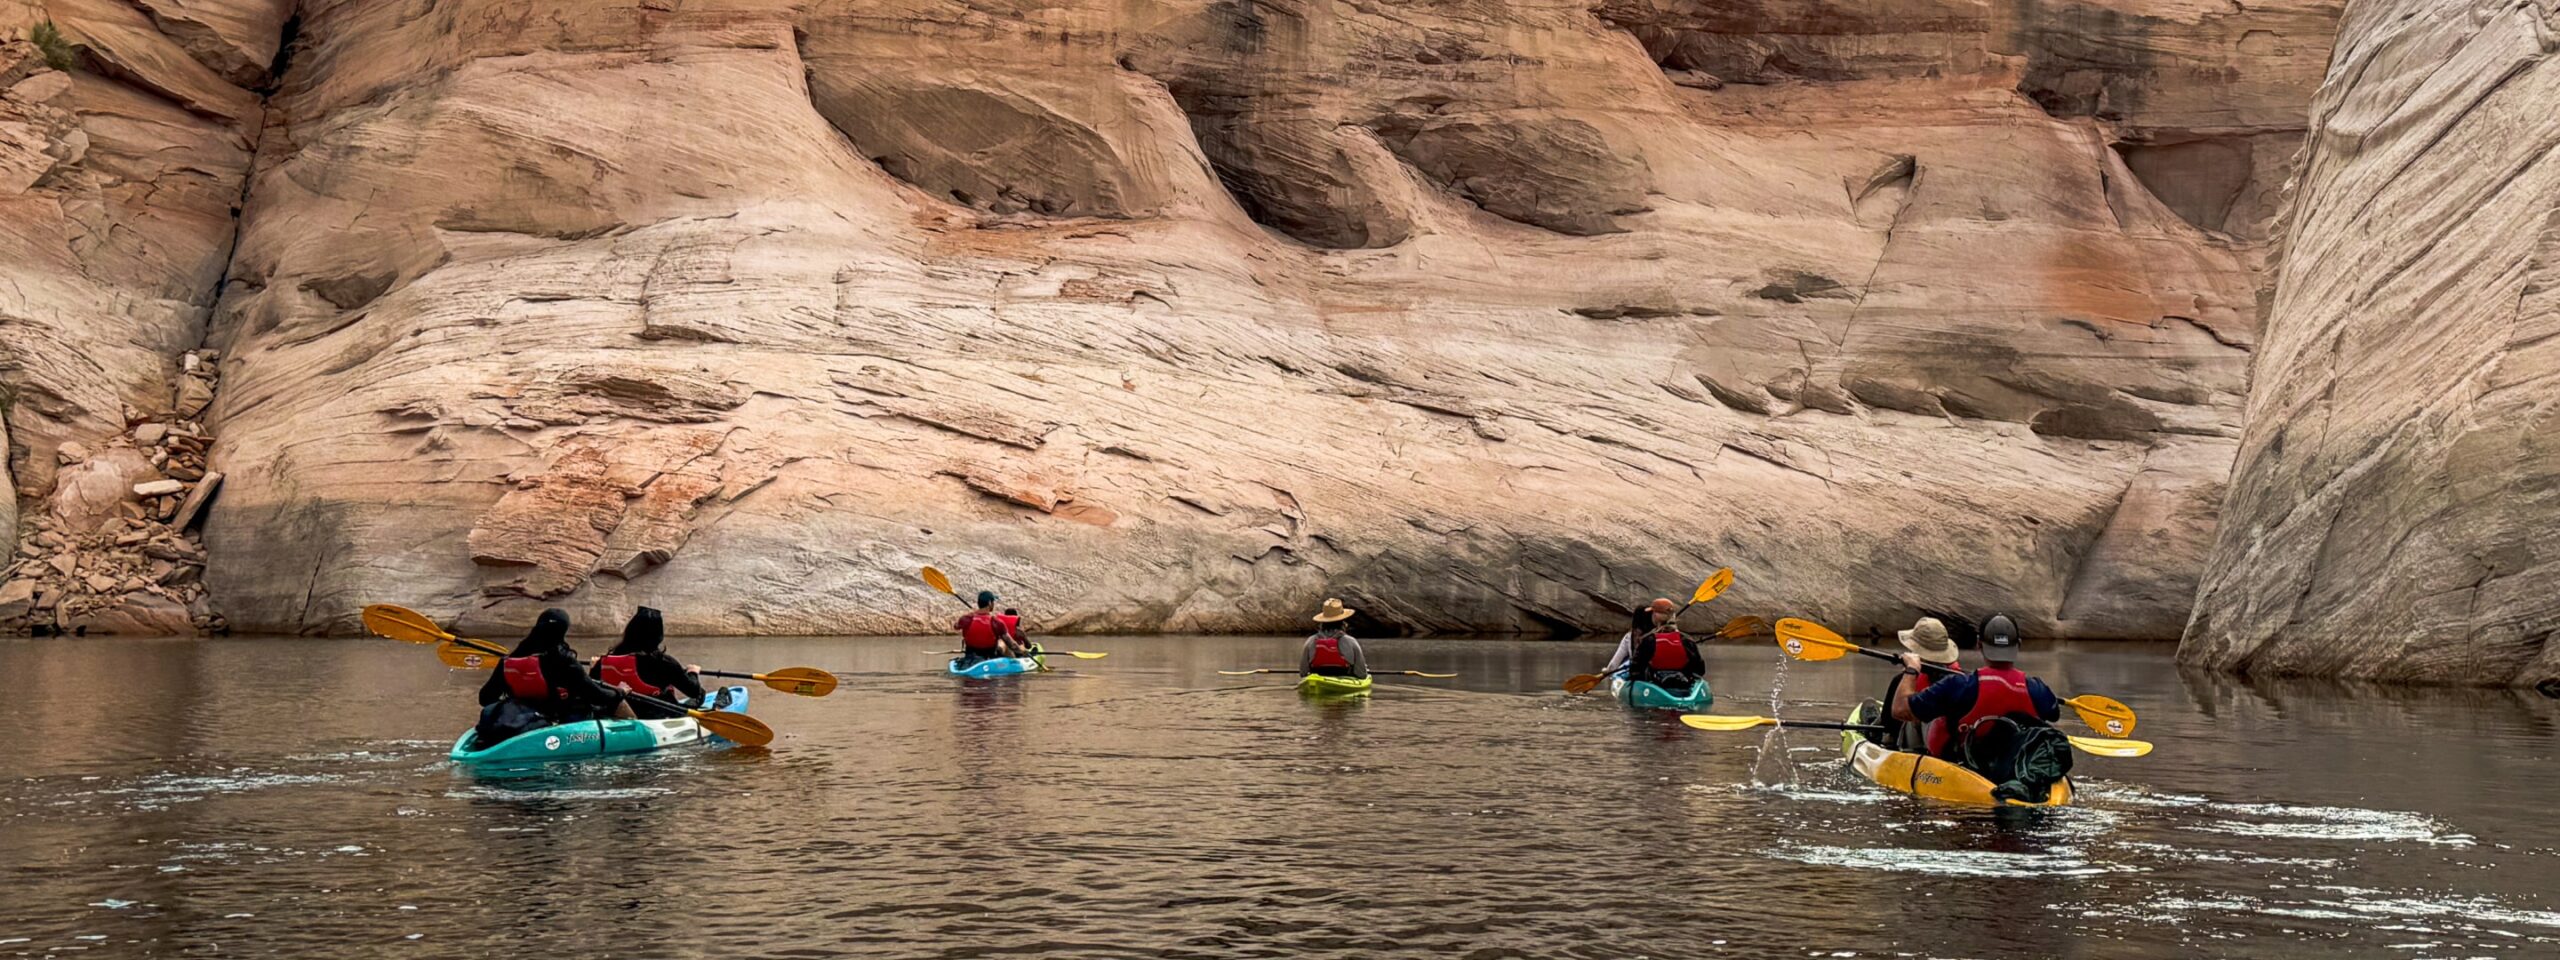 group of kayakers safely paddling through a canyon of lake powell after receiving a thorough safety briefing